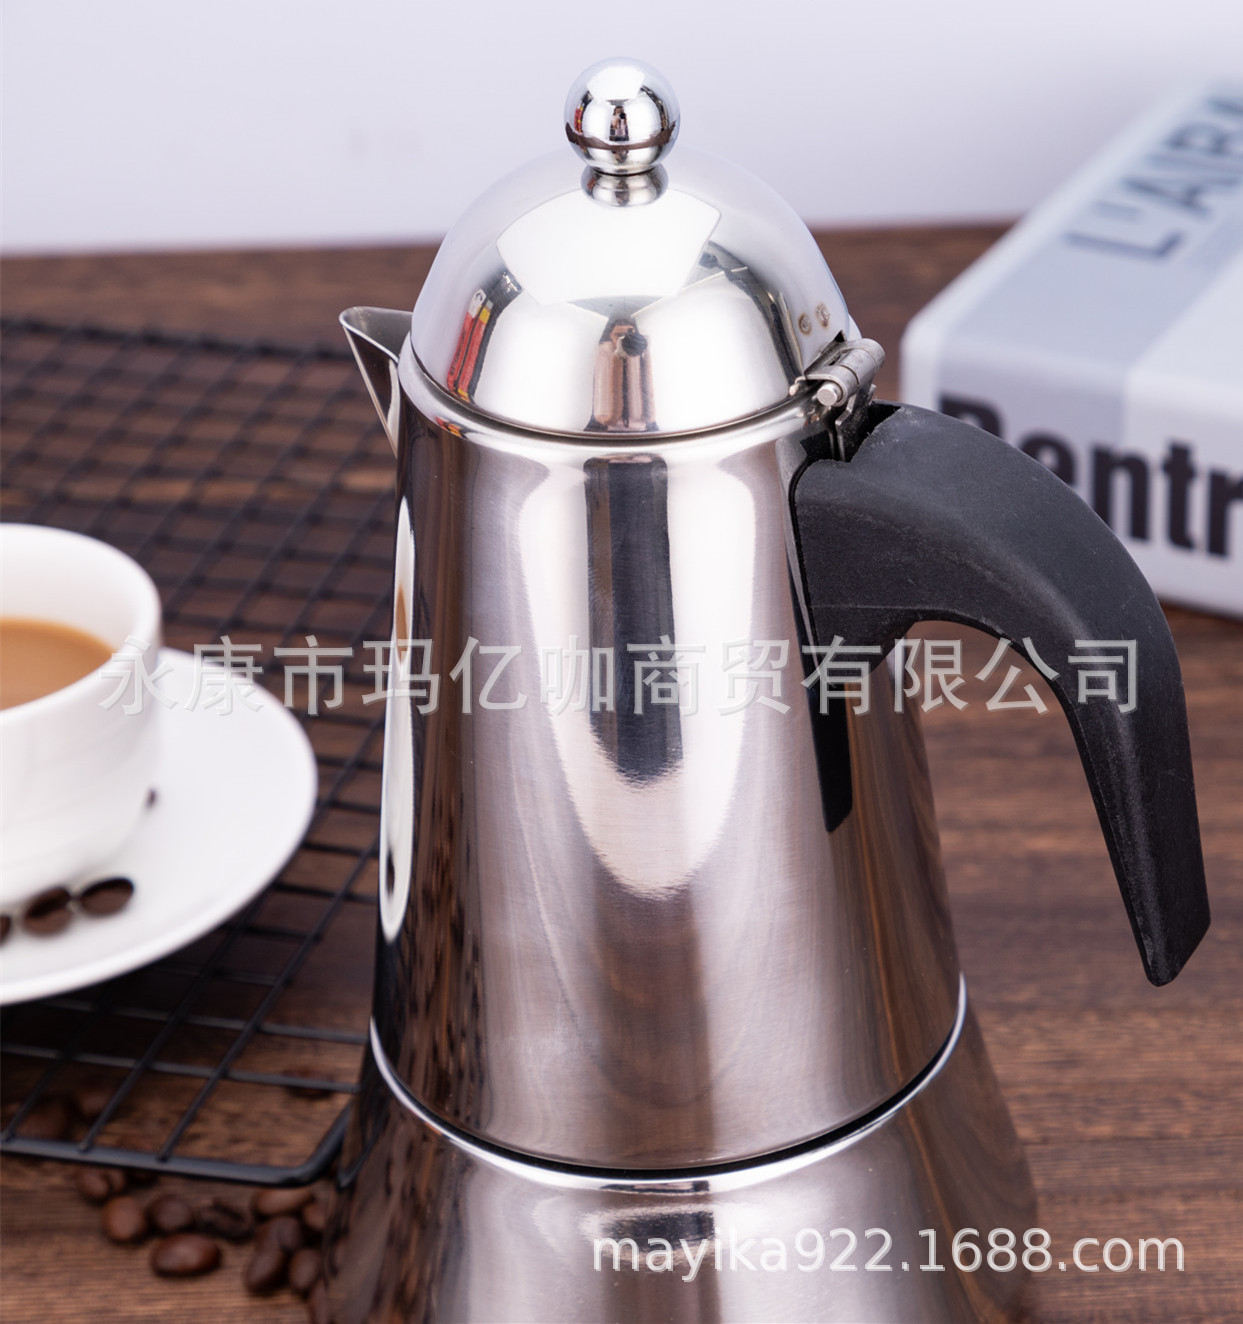 New Stainless Steel Big Belly Mocha Coffee Pot Coffee Appliance Coffee Sharing Pot